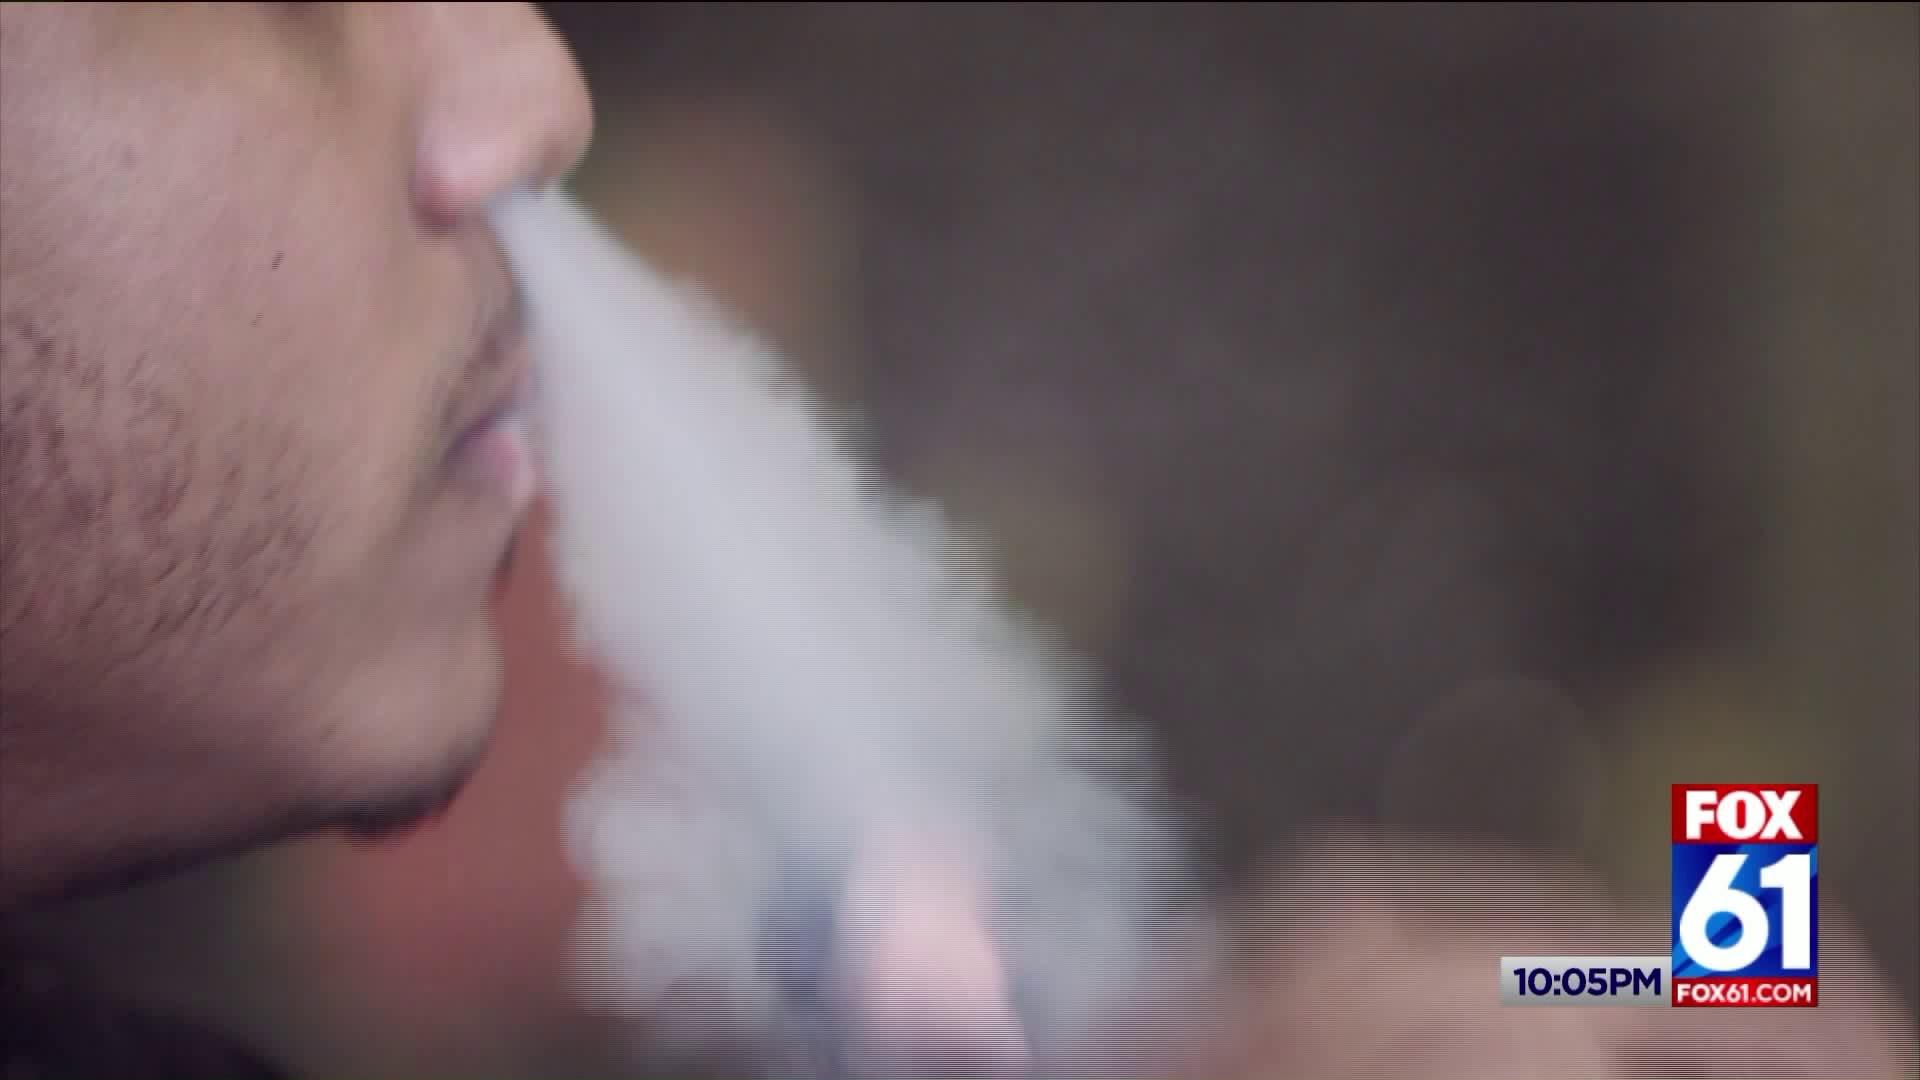 Connecticut High School restricts bathroom access because of Vaping